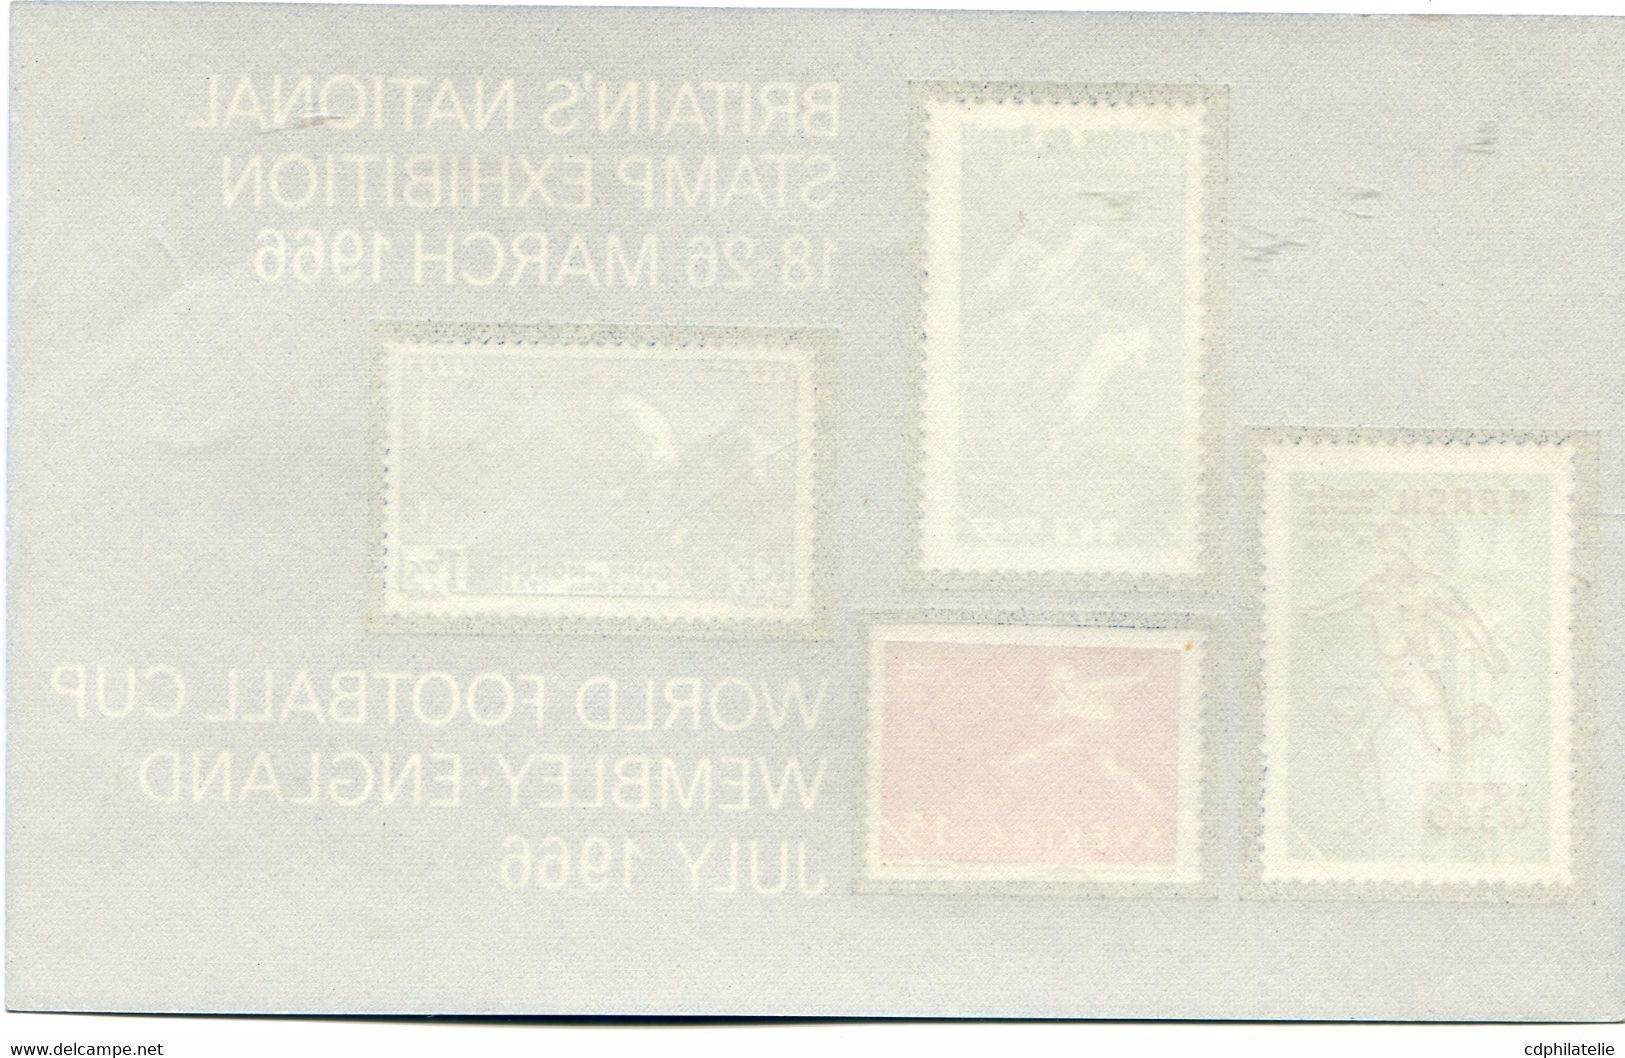 FEUILLET ** " BRITAIN'S NATIONAL STAMP EXHIBITION 18-26 MARCH 1966 WORLD FOOTBALL CUP WEMBLEY ENGLAND JULY 1966 " - 1966 – Angleterre